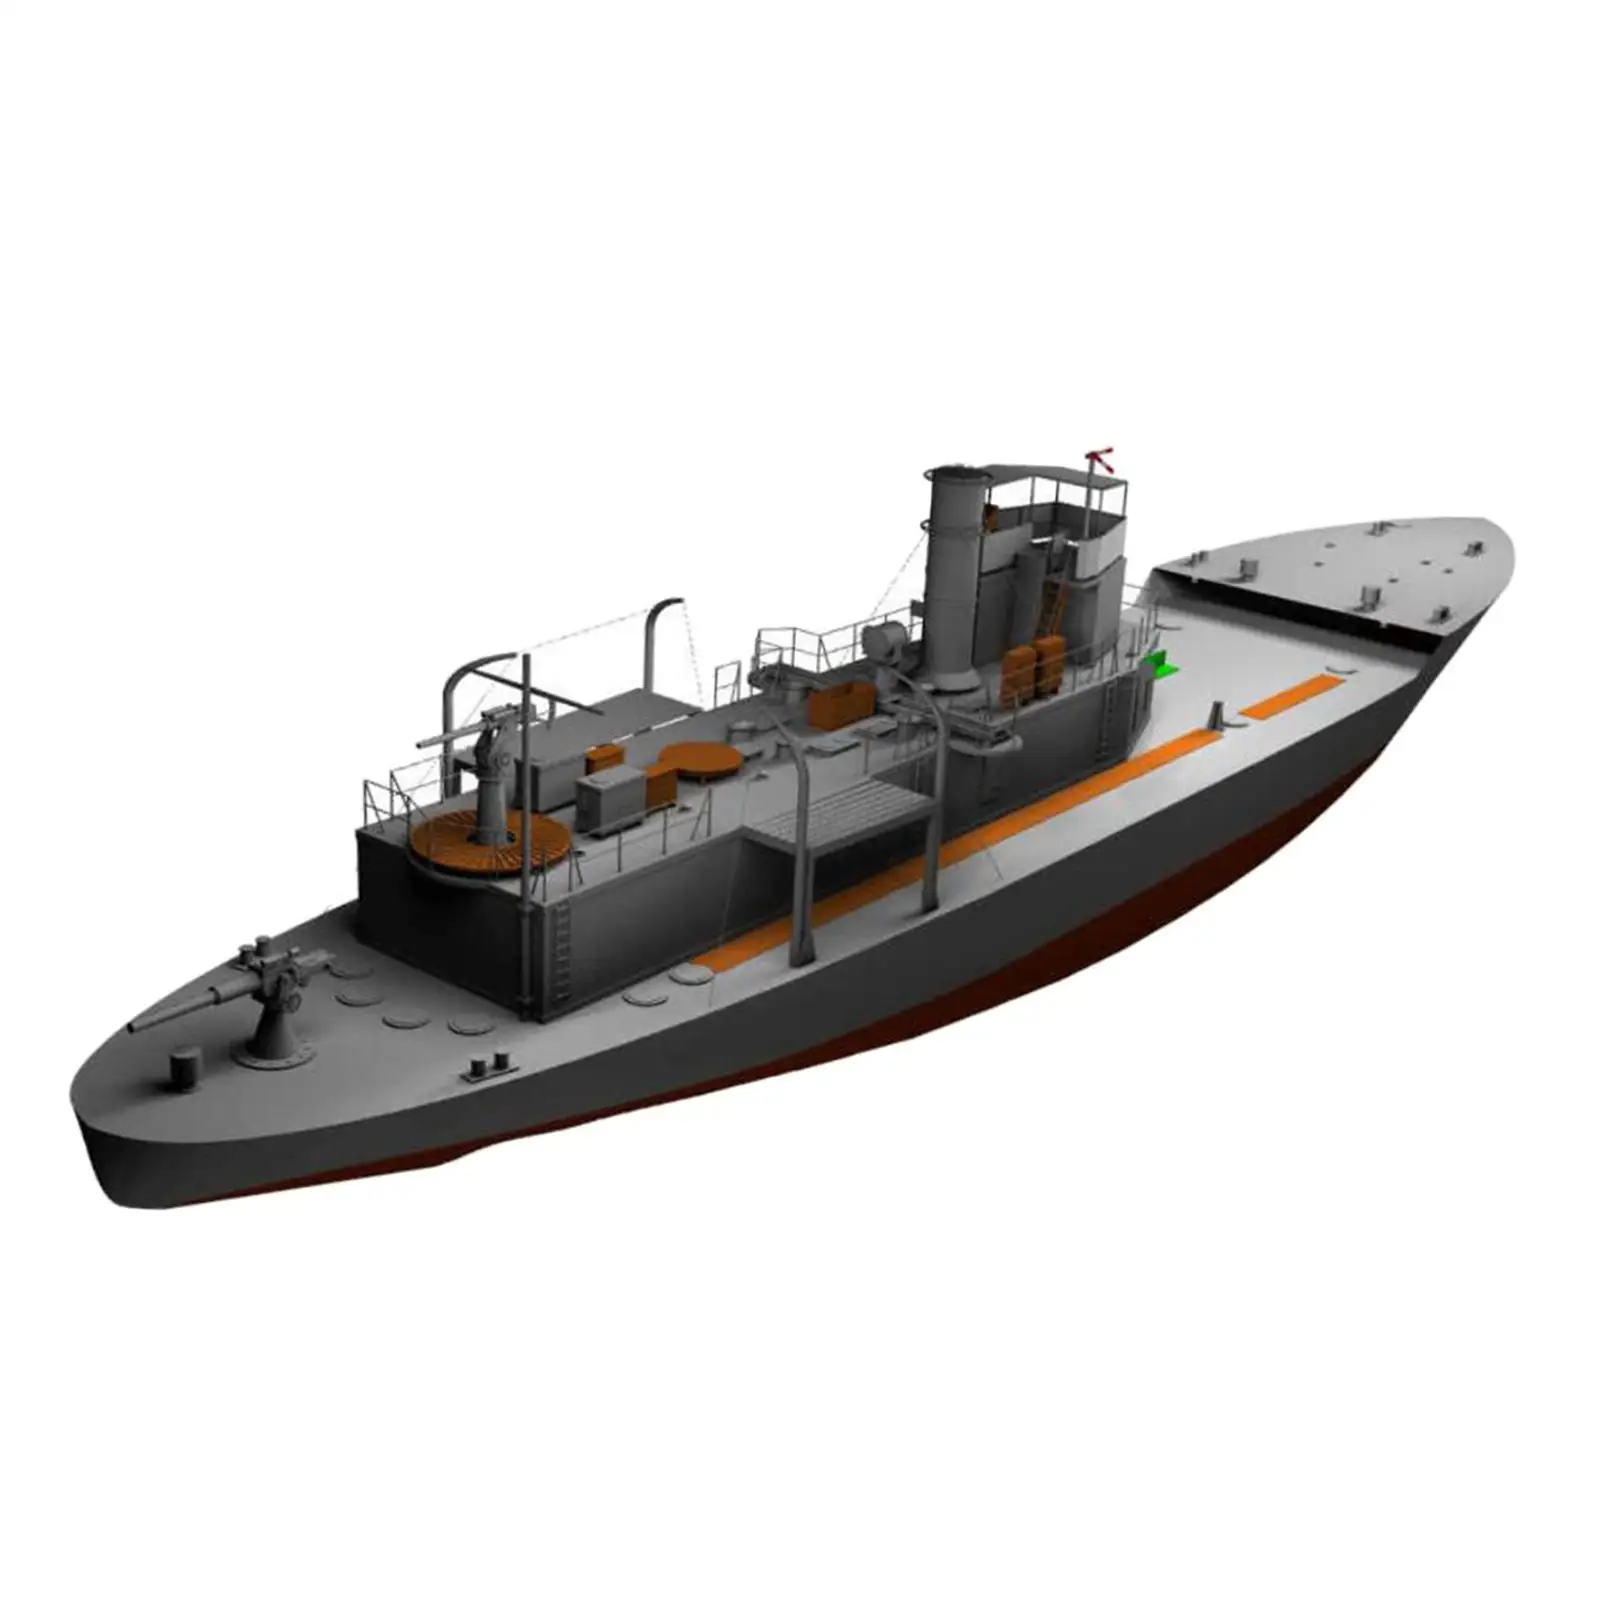 Patrol Boat Kits Brain Teaser Puzzle Paper DIY Toy Papercraft 1/100 DIY Paper Ship for Children Home Decoration Boys Adults Kids